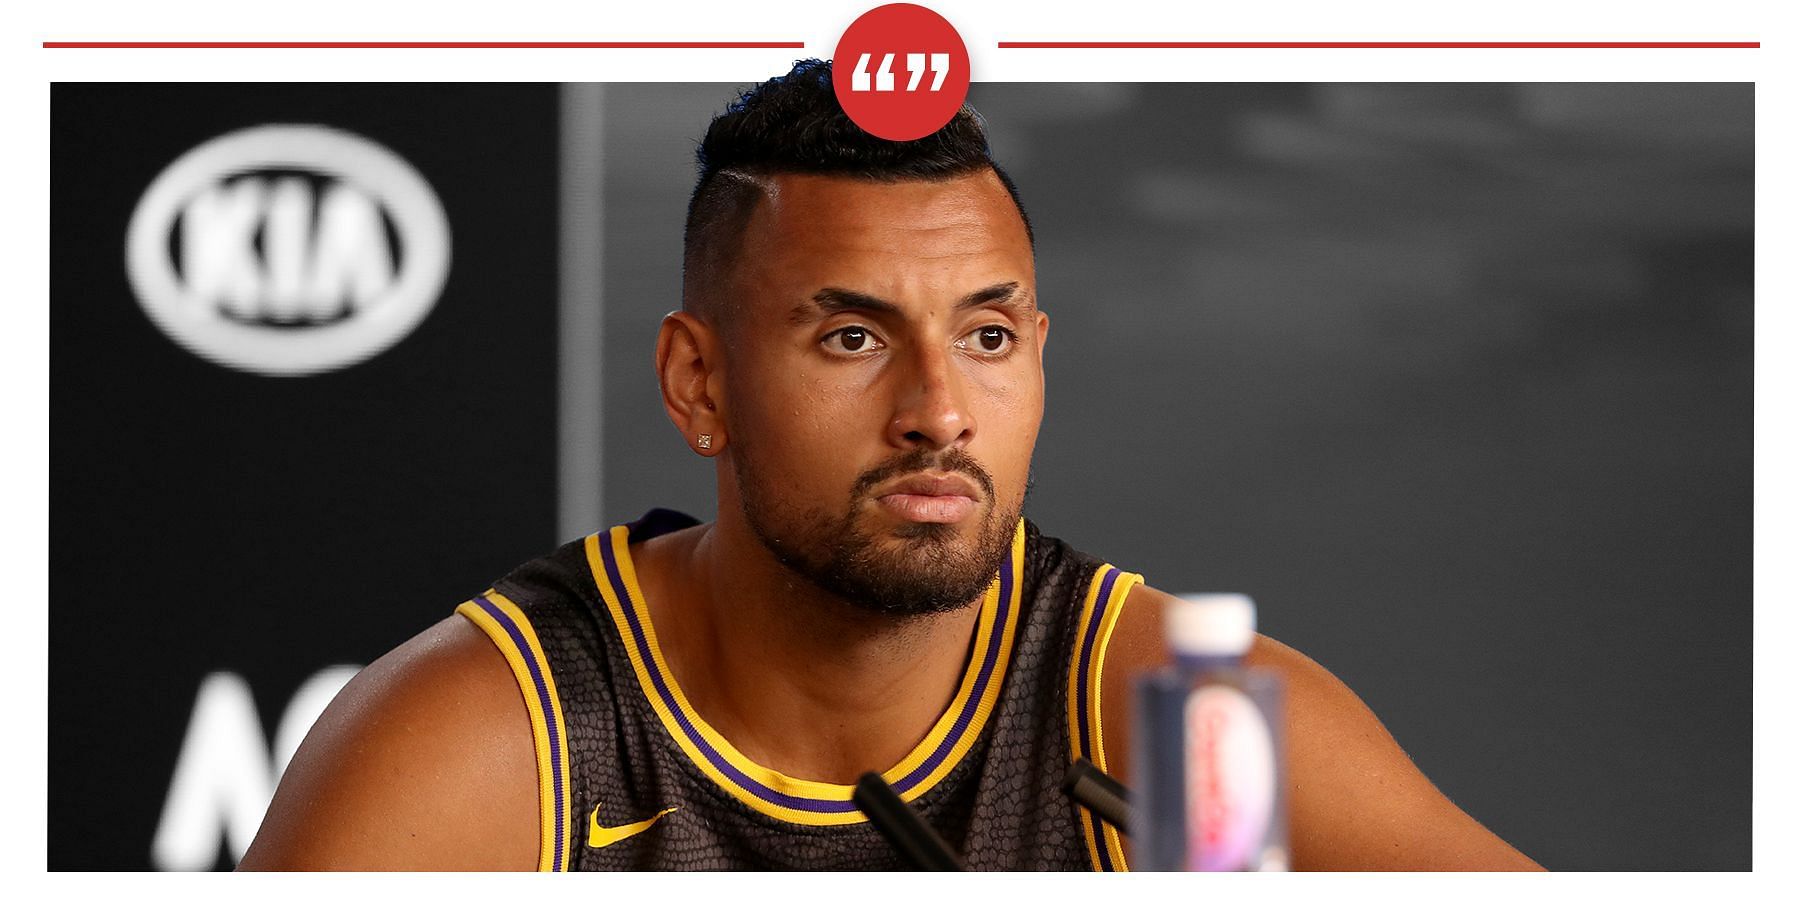 Nick Kyrgios is eager to climb up the ATP rankings.